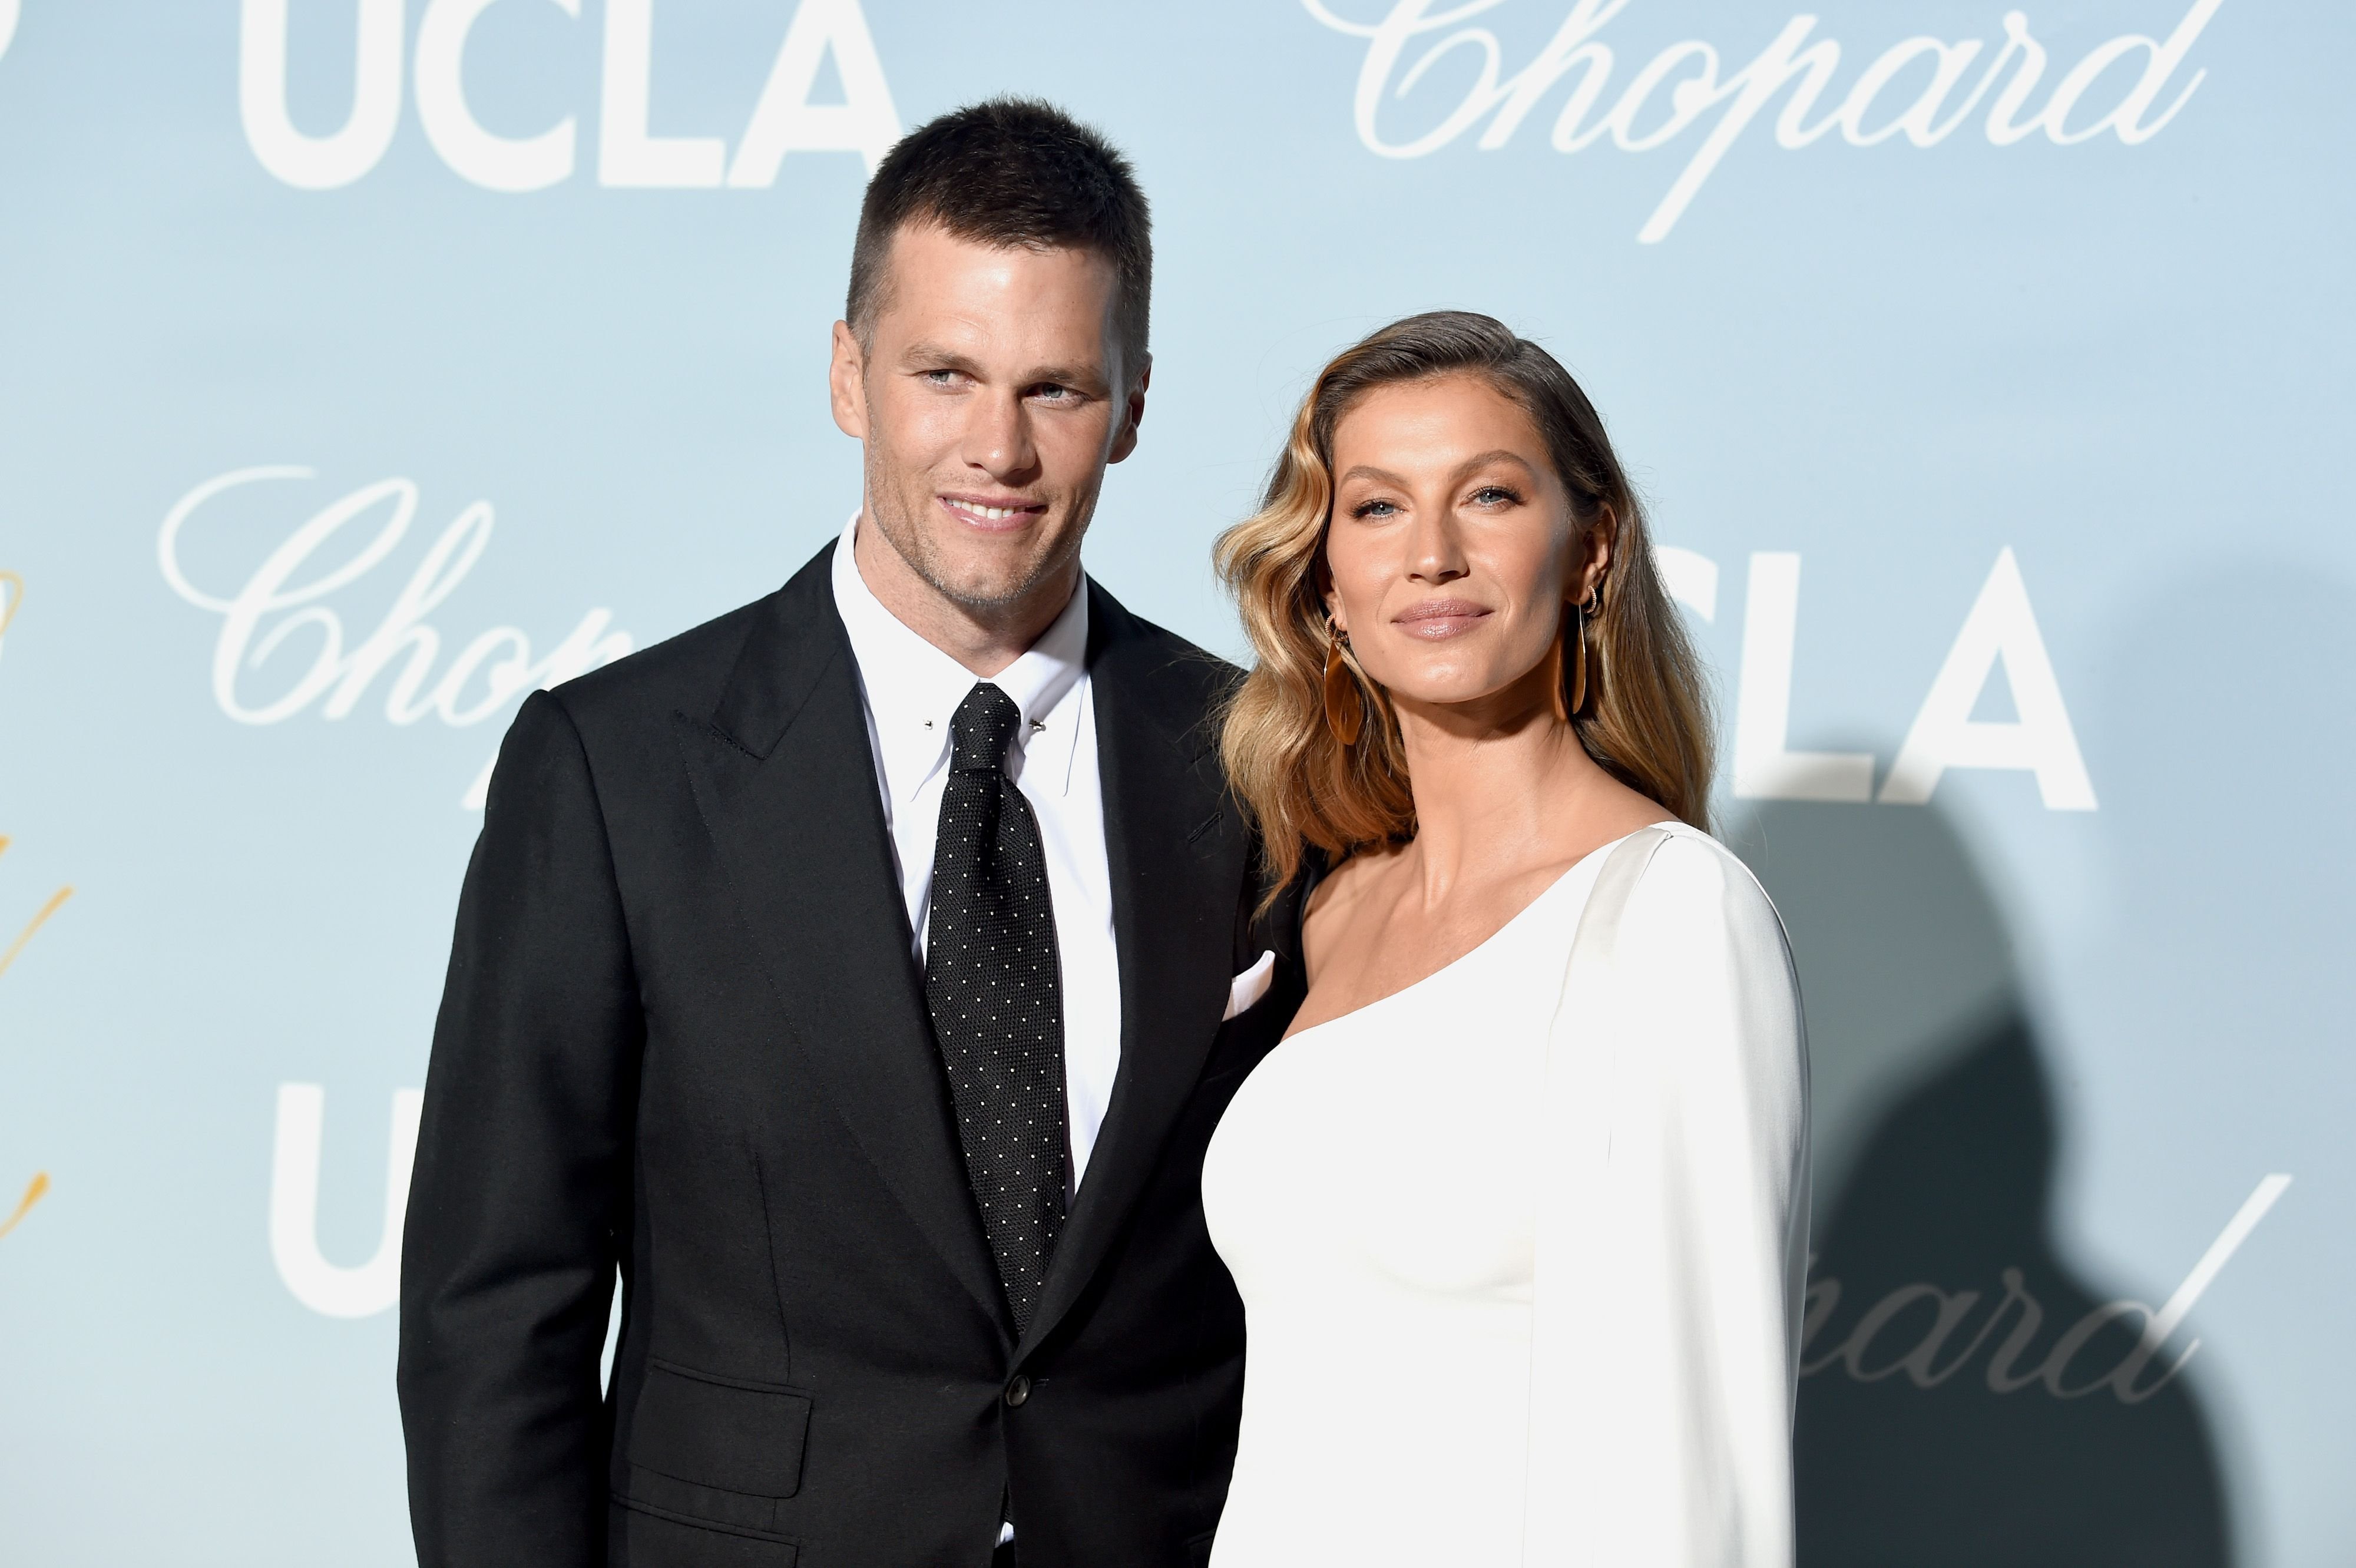 Tom Brady and Gisele Bündchen at the 2019 Hollywood For Science Gala at Private Residence on February 21, 2019 in Los Angeles, California | Photo: Getty Images